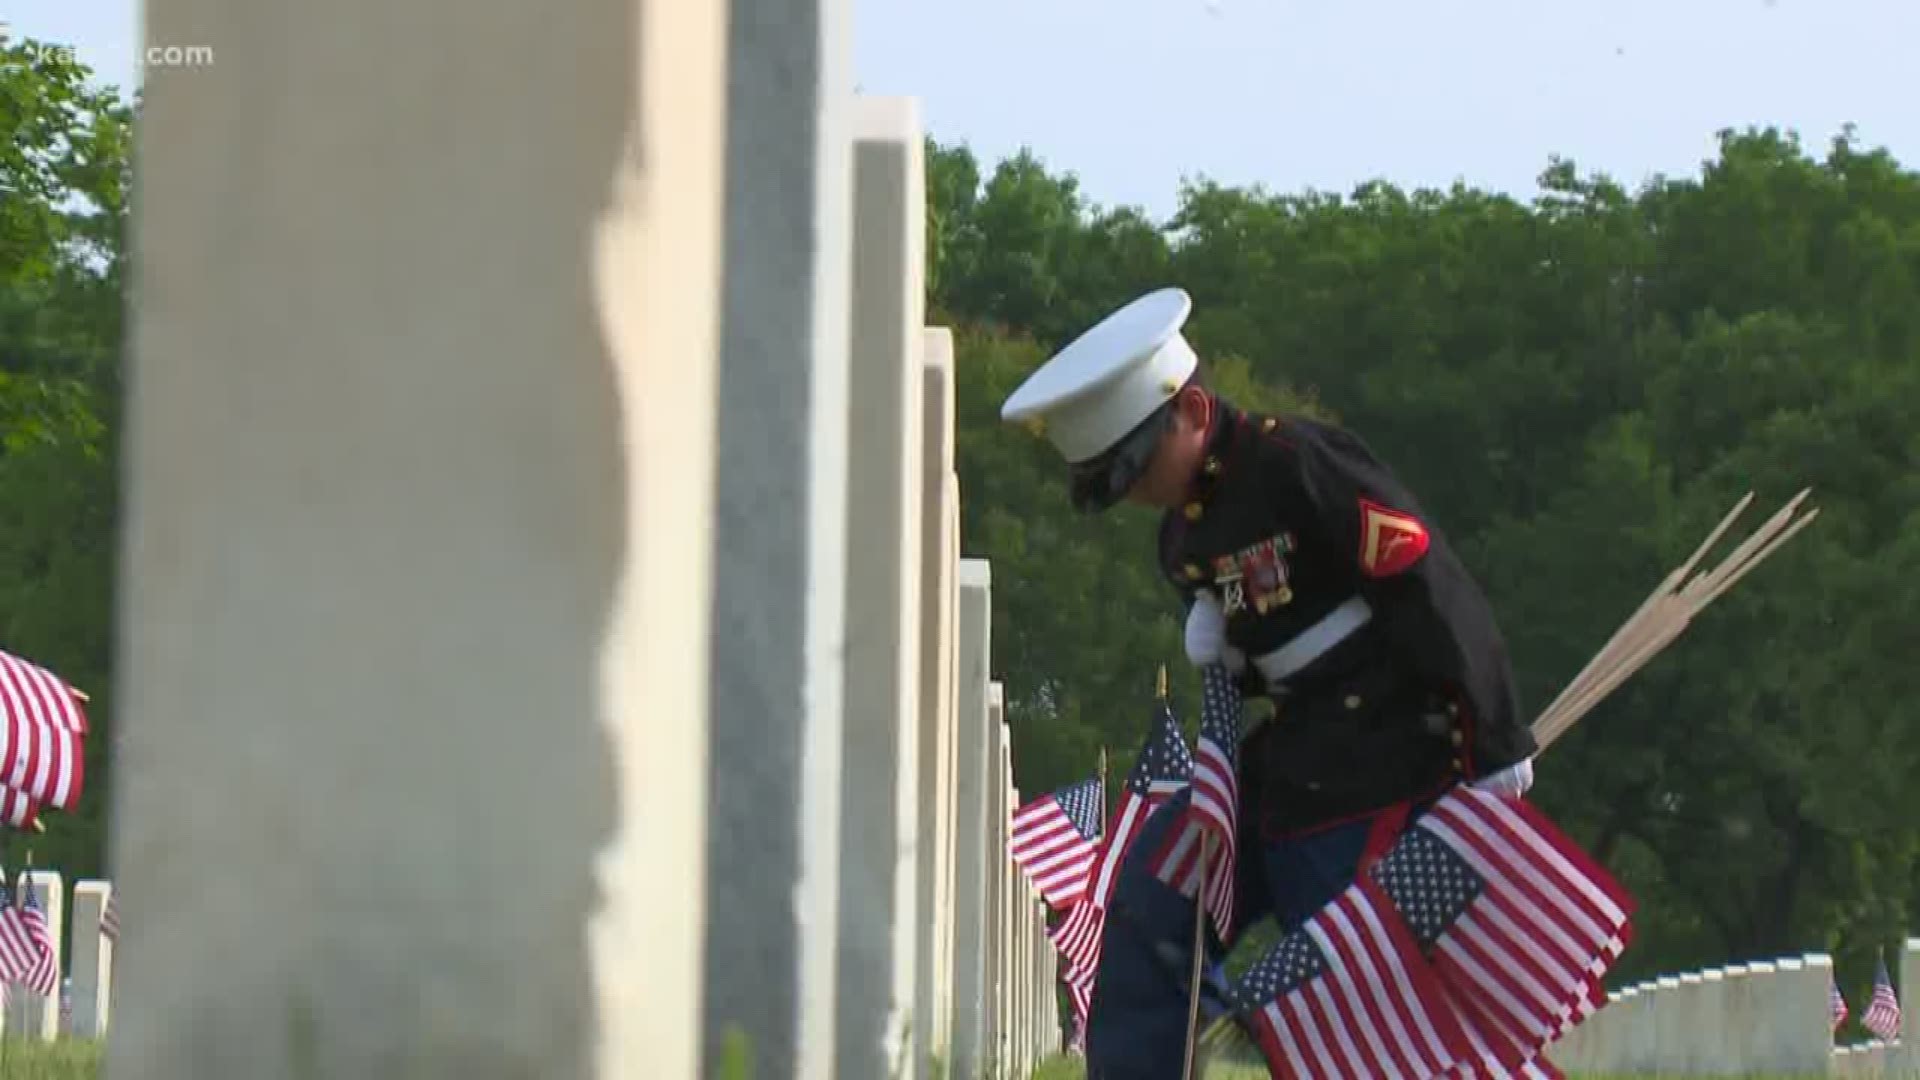 Today, several Gold Star families placed flags at Fort Snelling. https://kare11.tv/2Ifl3O2